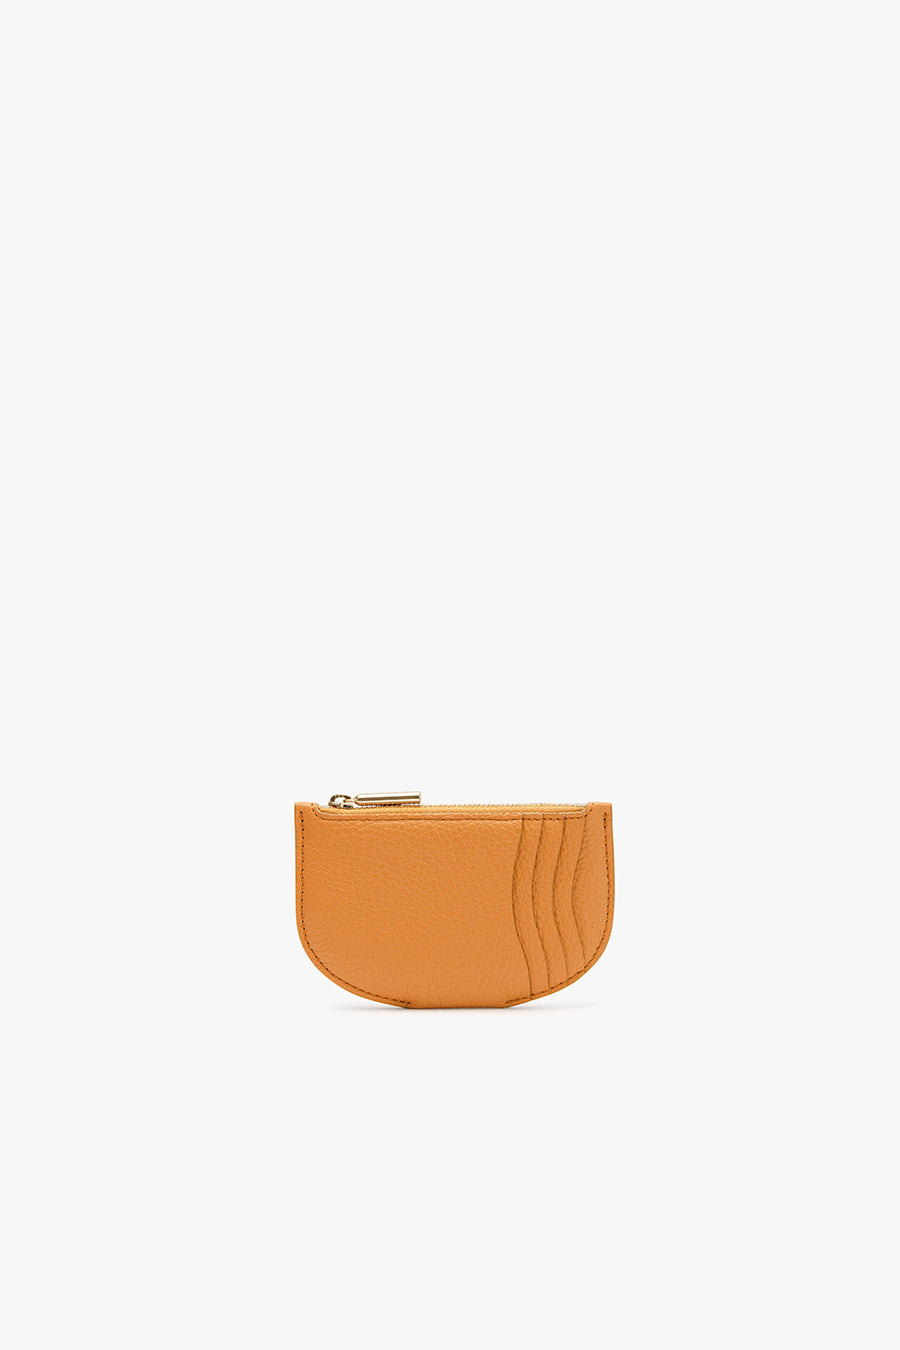 Ethically-Made Zip Wallets by Baggu, Cuyana, & Everlane - Welcome Objects